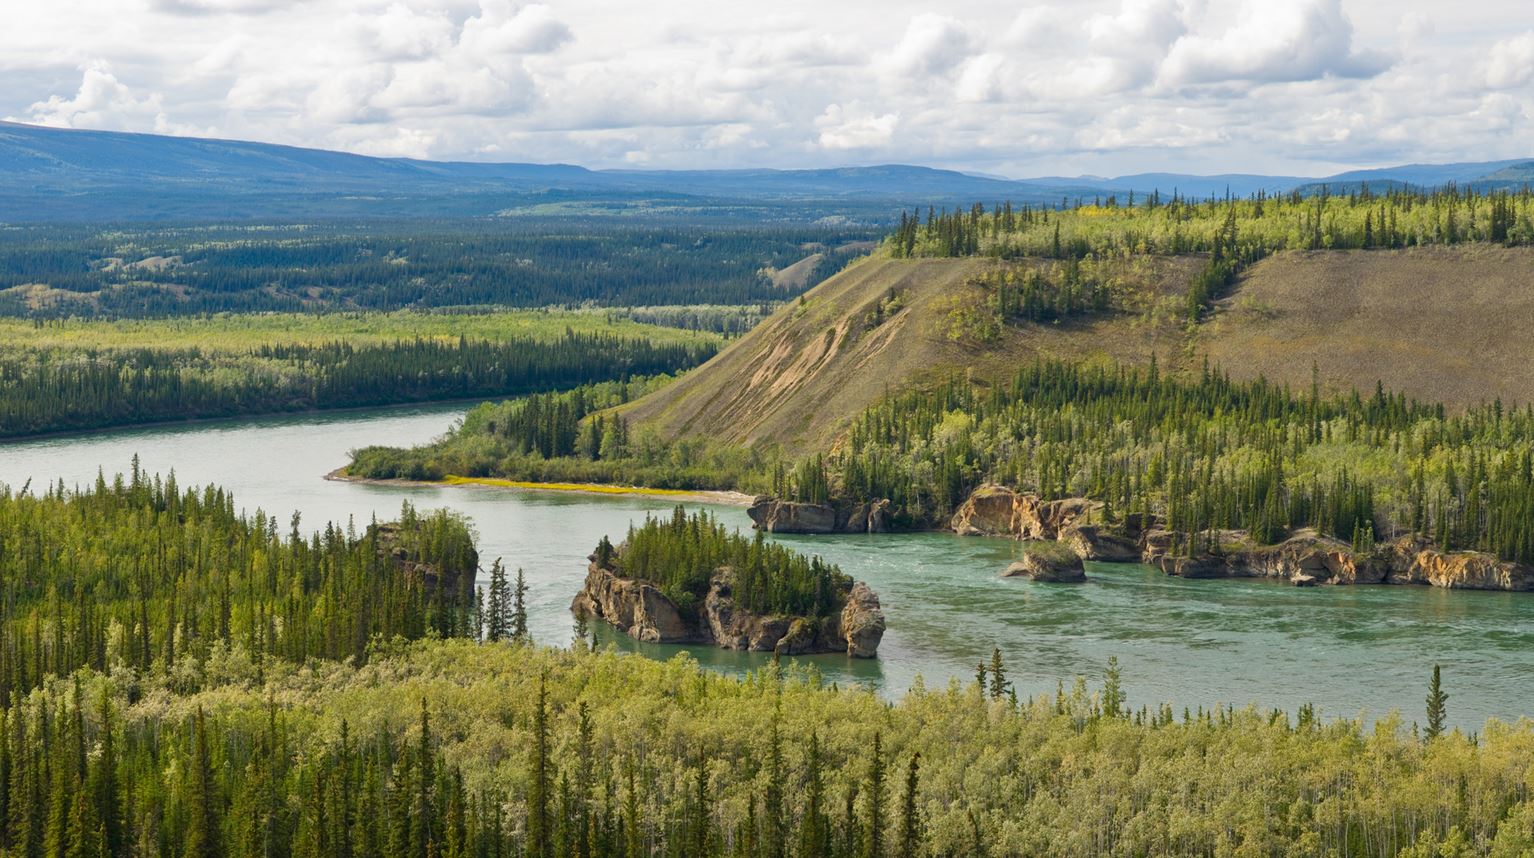 Yukon River with hills and forrests near Carmacks in Yukon Territory 